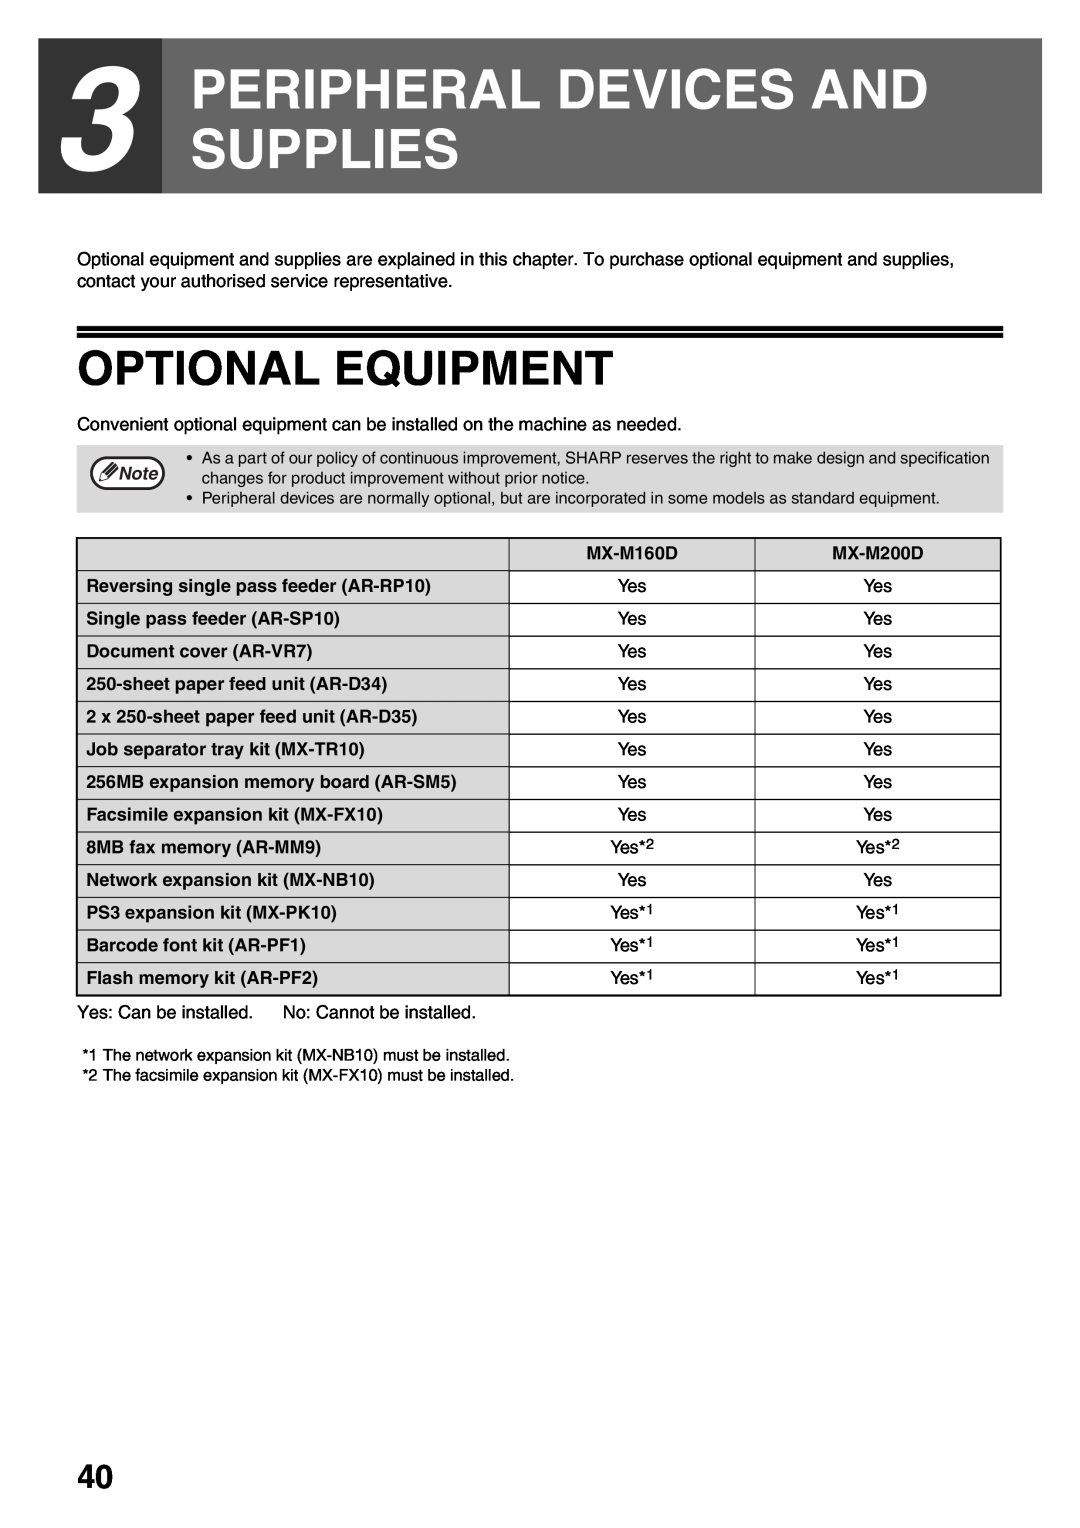 Sharp MX-M160D, MX-M200D operation manual Peripheral Devices And Supplies, Optional Equipment 